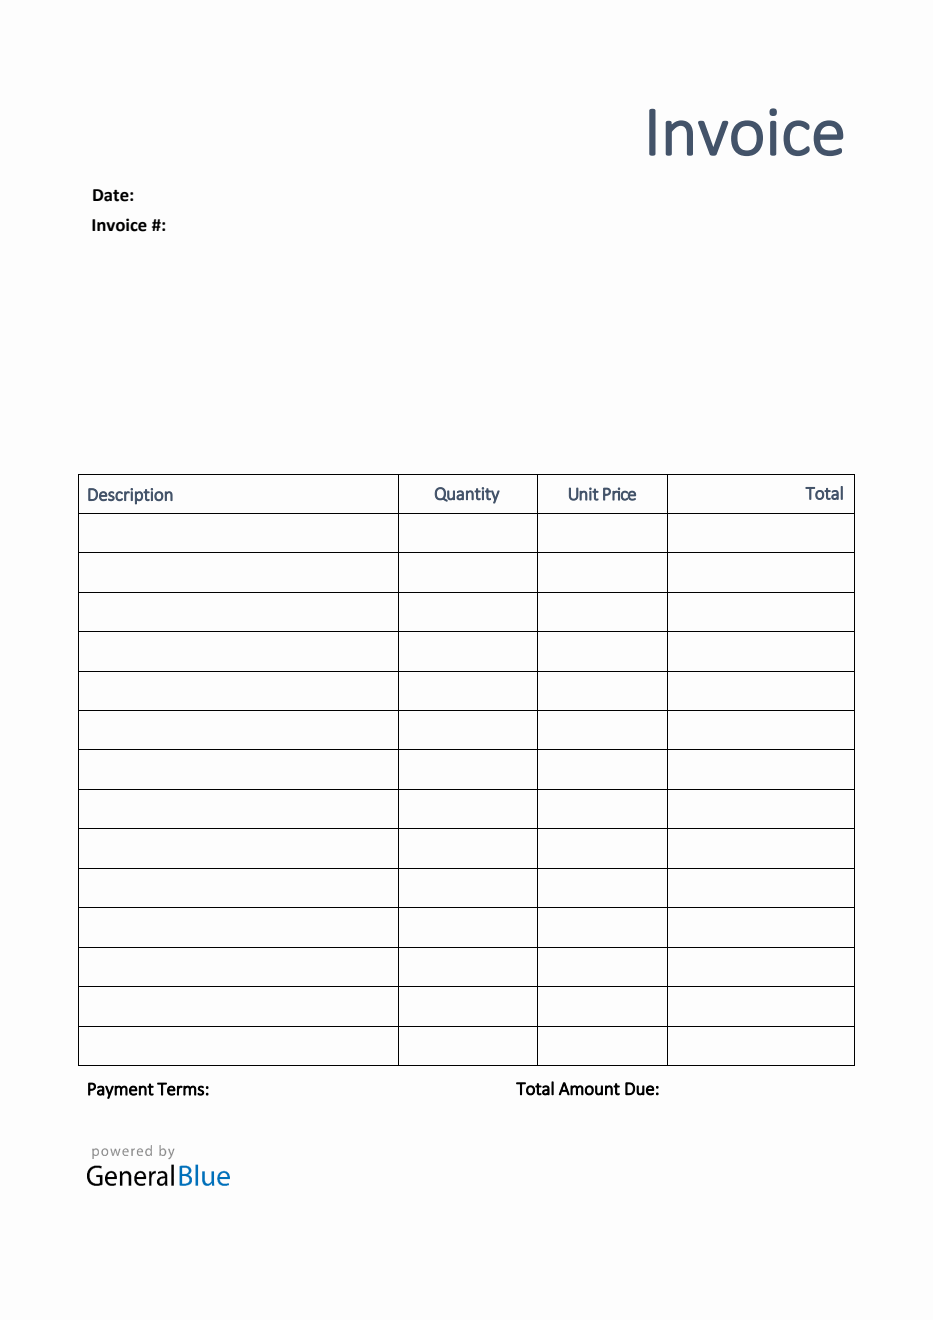 Free Printable Invoices Uk - FREE PRINTABLE TEMPLATES For Sample Invoice Template Uk